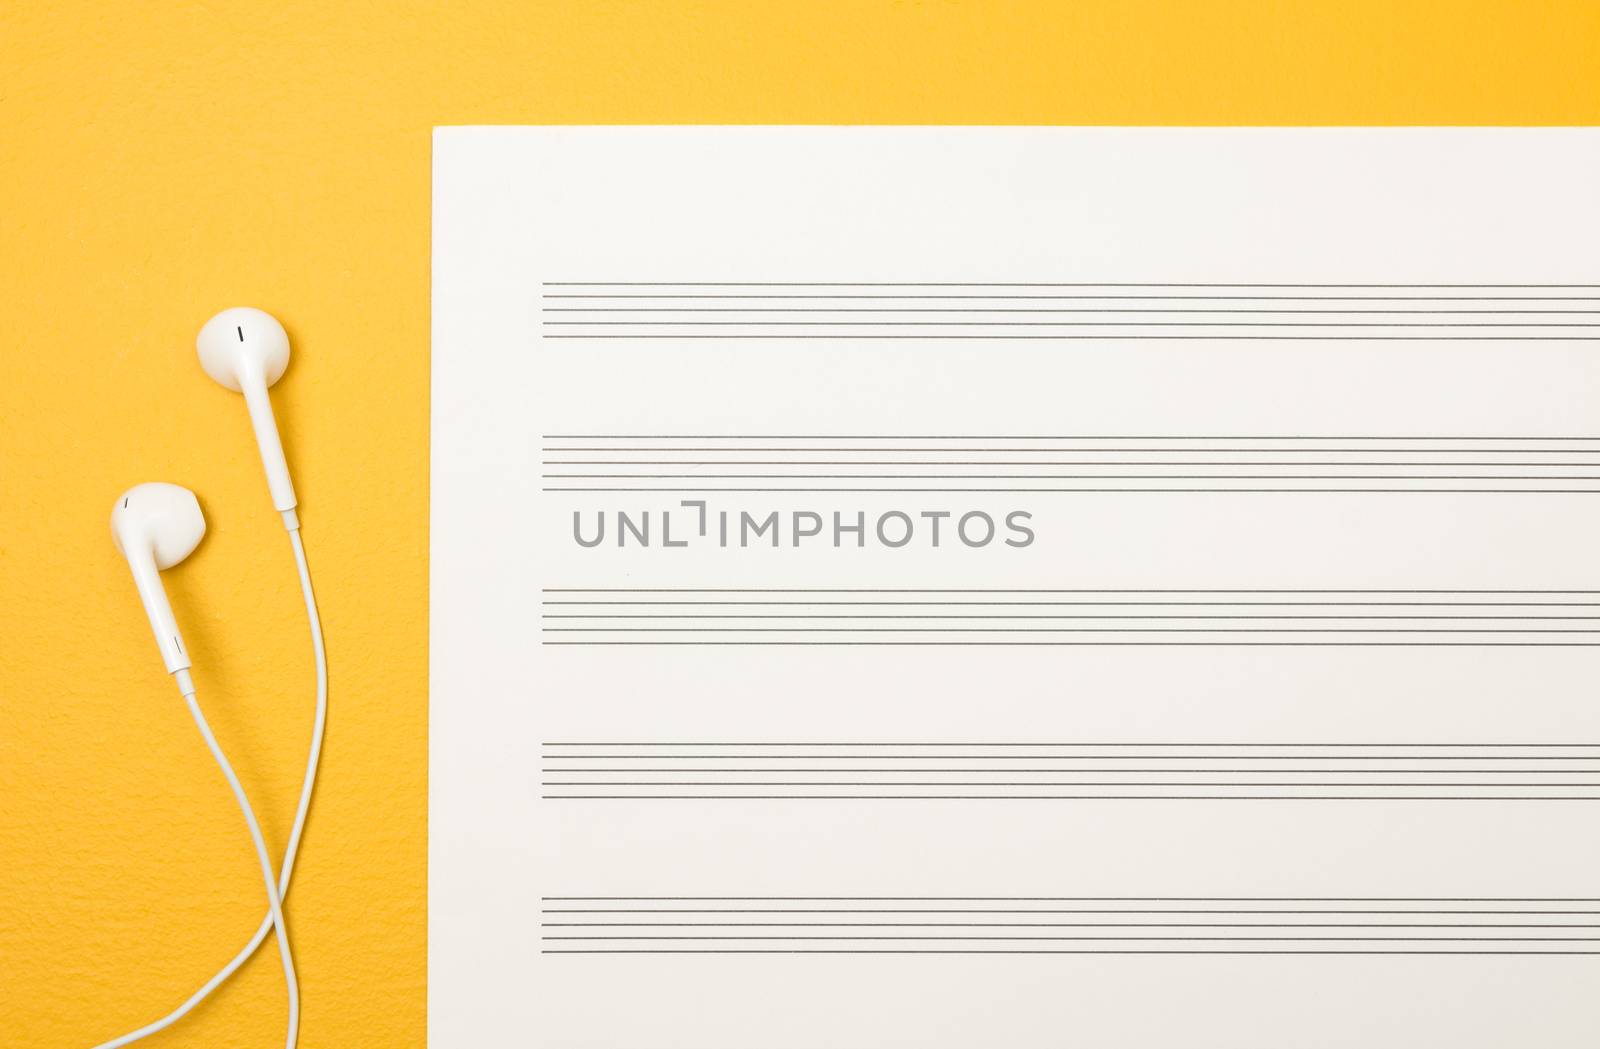 White earphones and blank music paper sheet on vibrant yellow background.